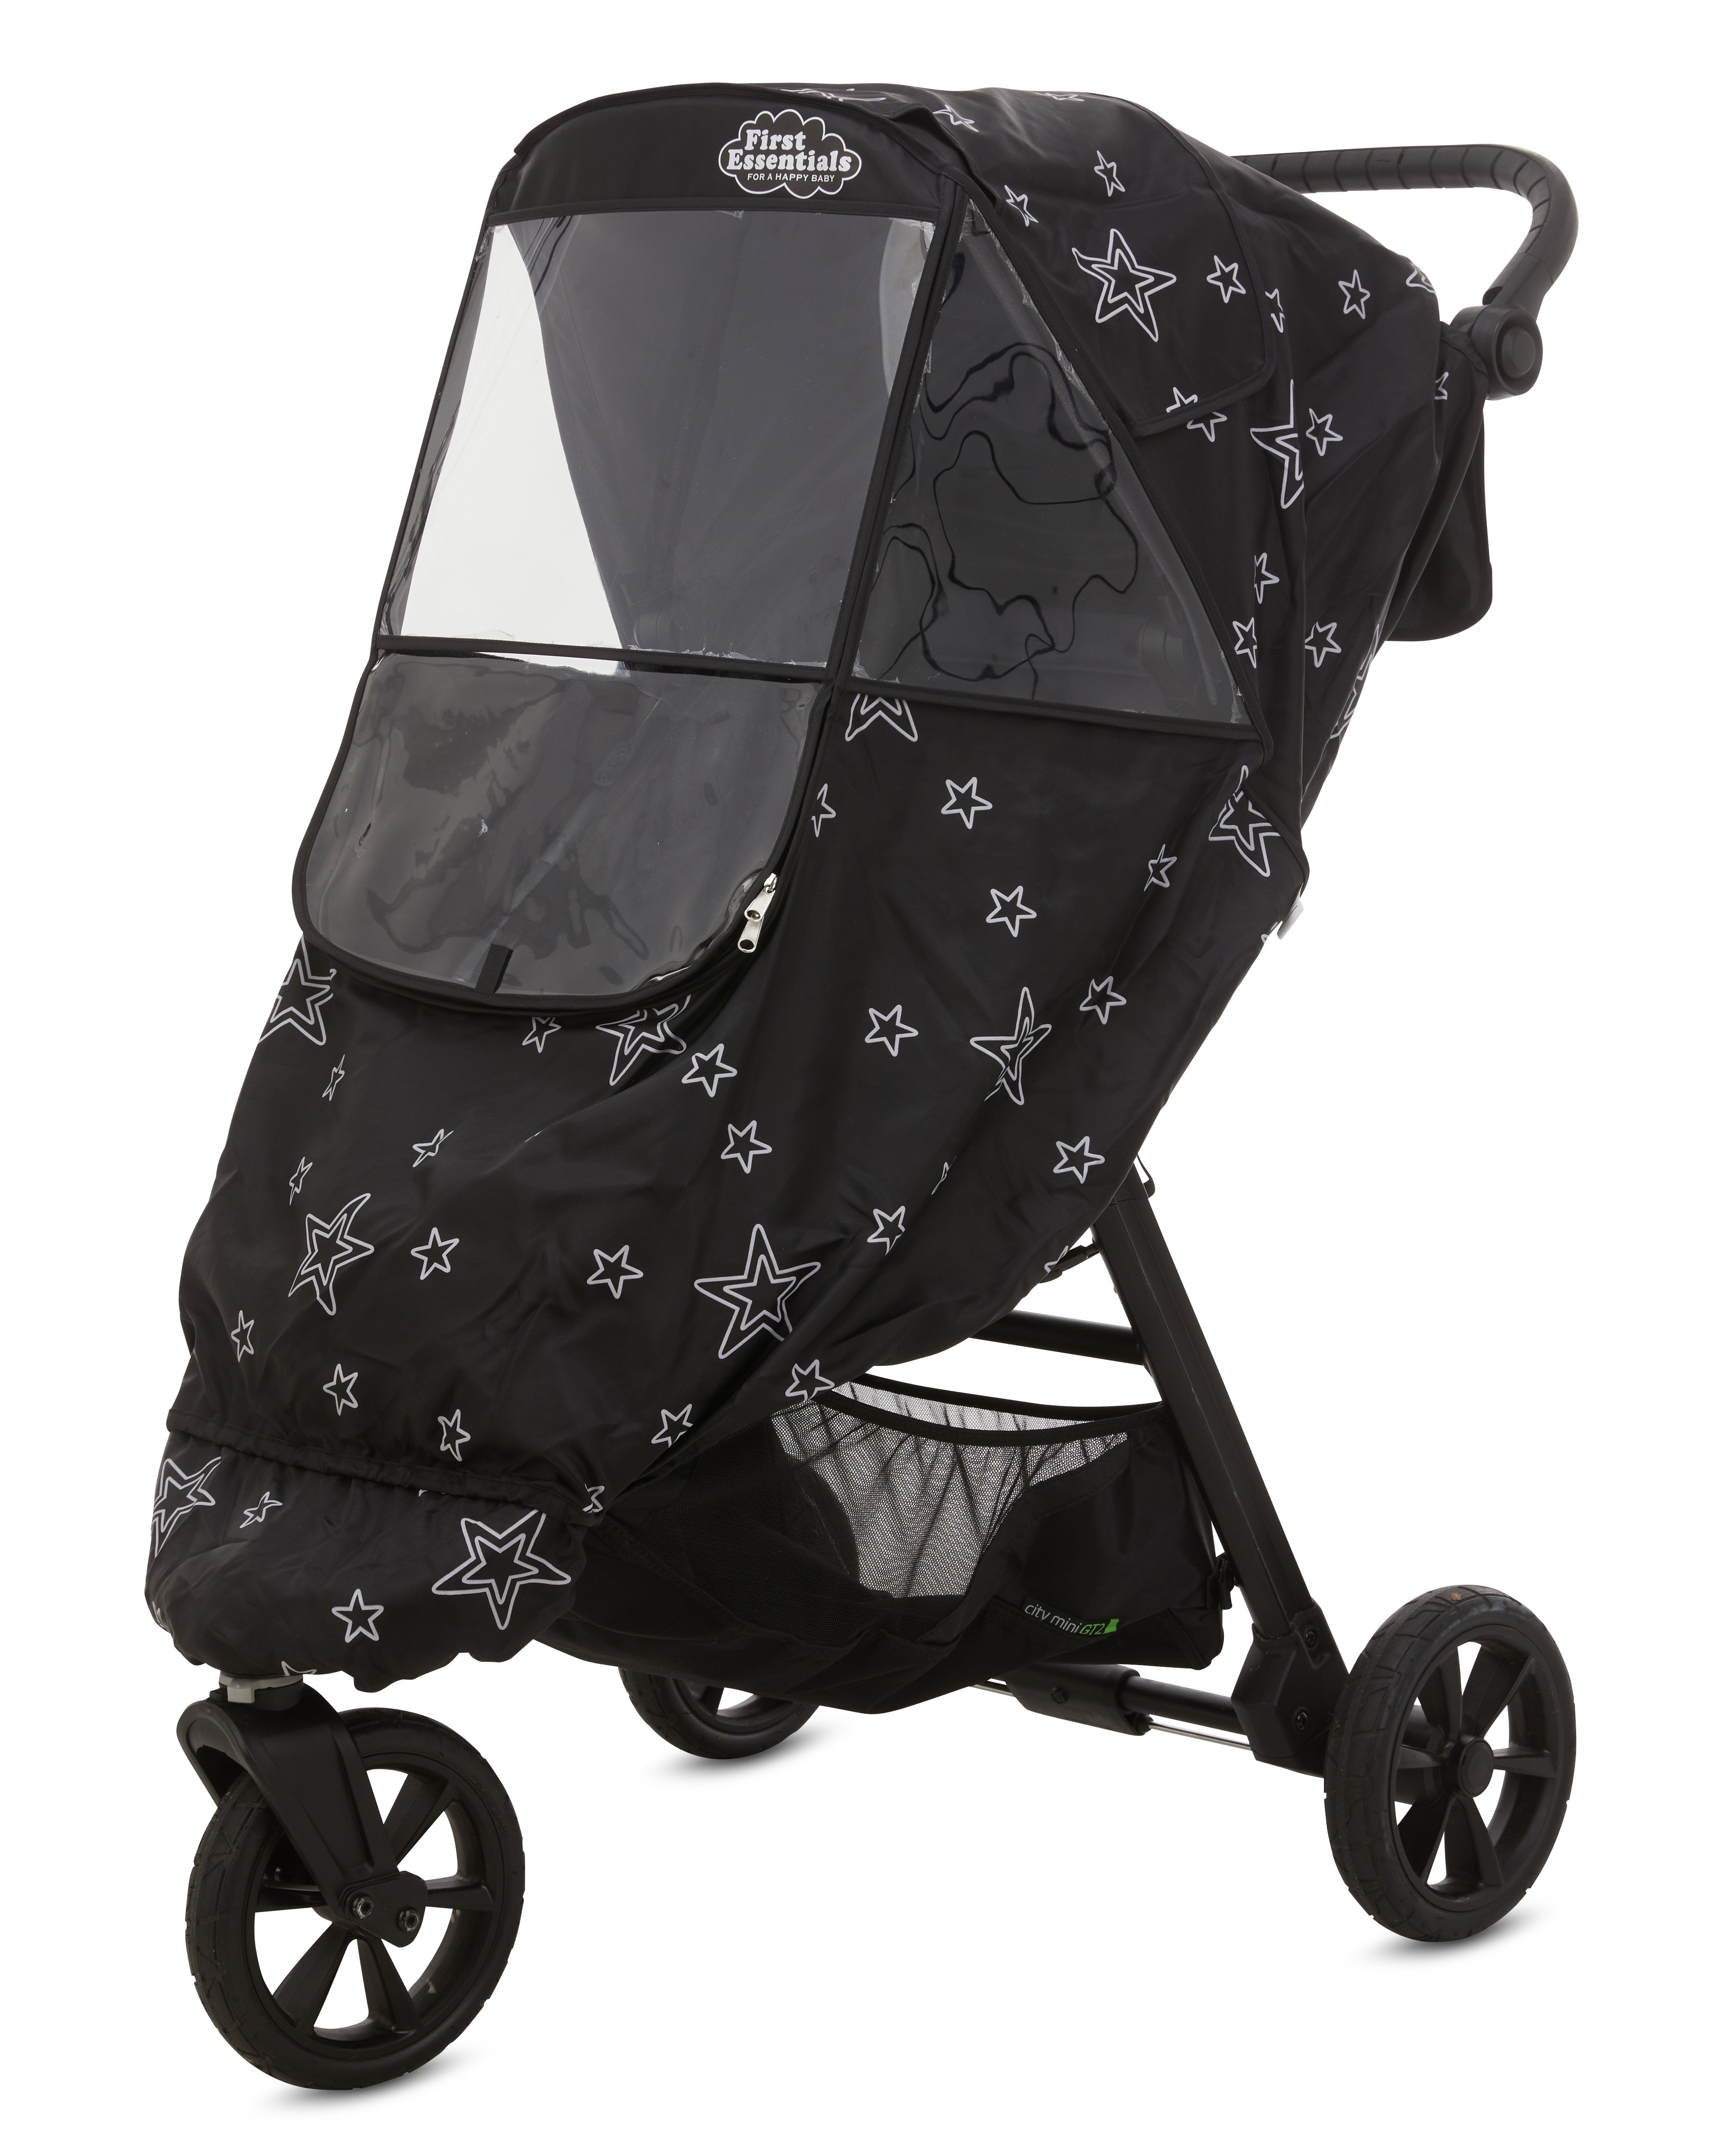 First Essentials Stroller Rain Cover Universal, Baby Travel Weather Shield,  Windproof Waterproof, Protect from Dust Snow (Black) 